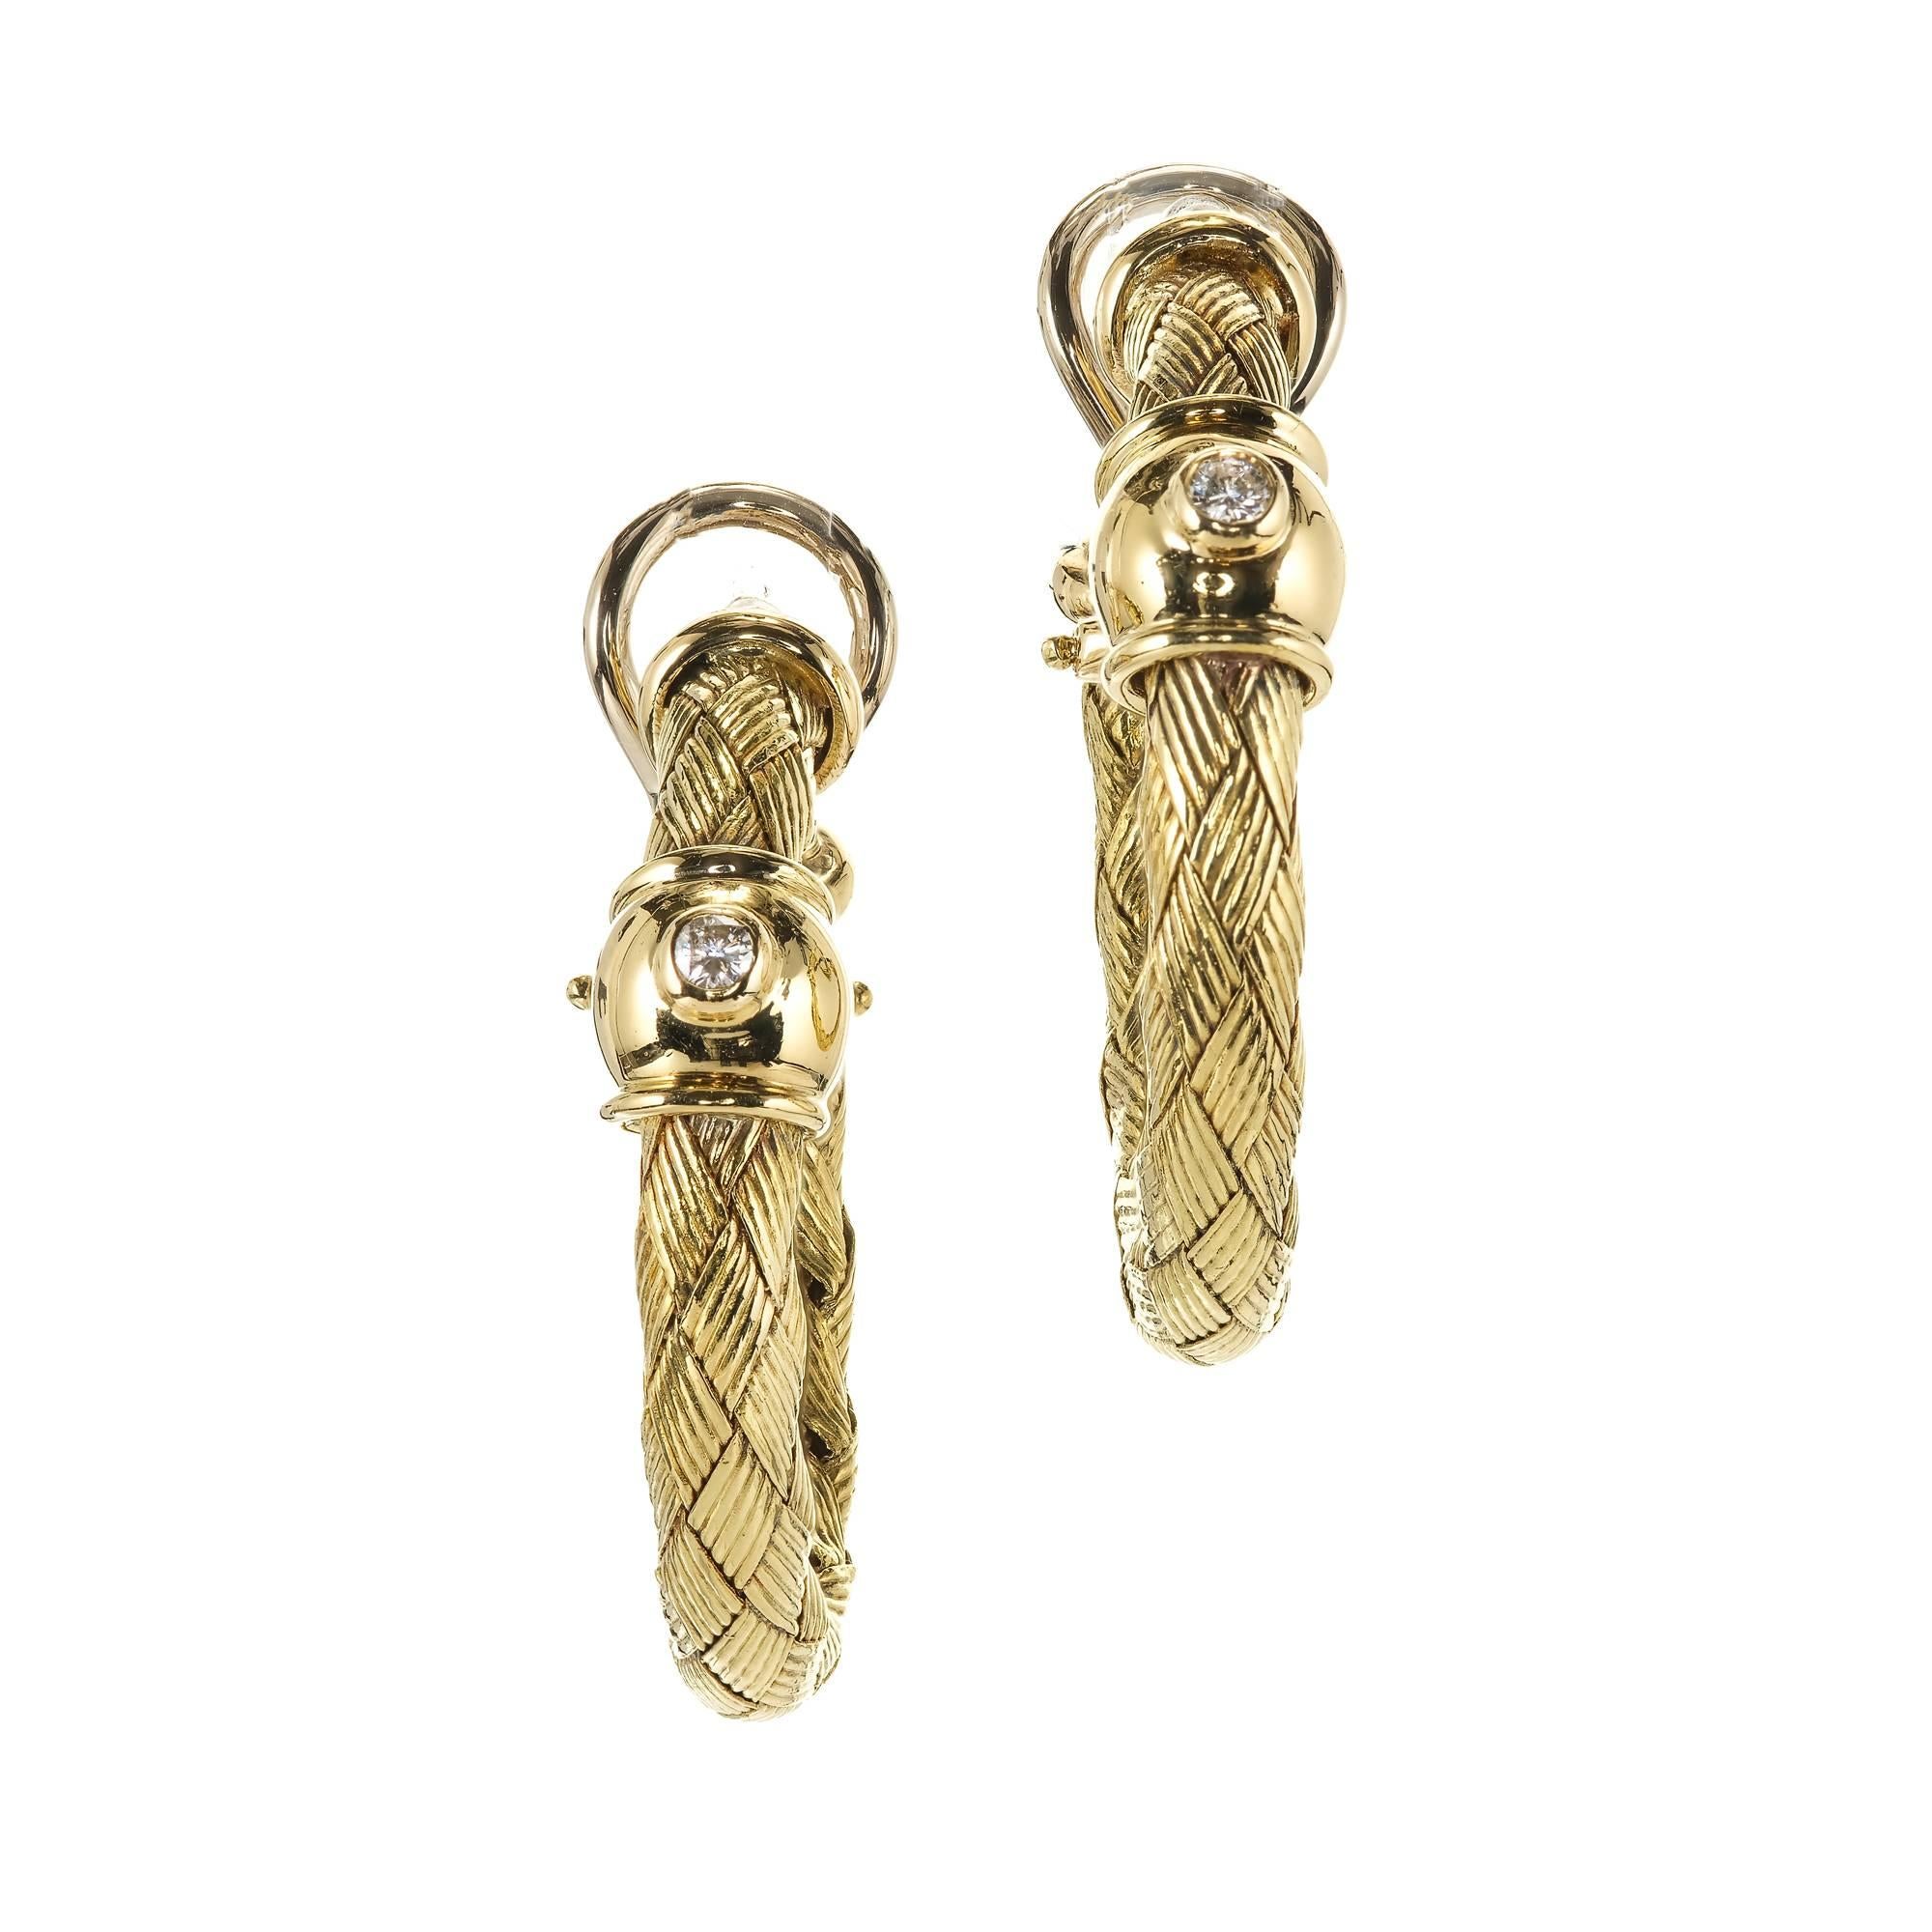 Solid 18k yellow gold braided diamond hoop earrings made in Italy. Post and clip tops. 

2 round Diamonds, approx. total weight .08cts, H, VS2
18k yellow gold
Tested and stamped: 18k
Hallmark: Italy
15.4 grams
Top to bottom: 32.39mm or 1.28